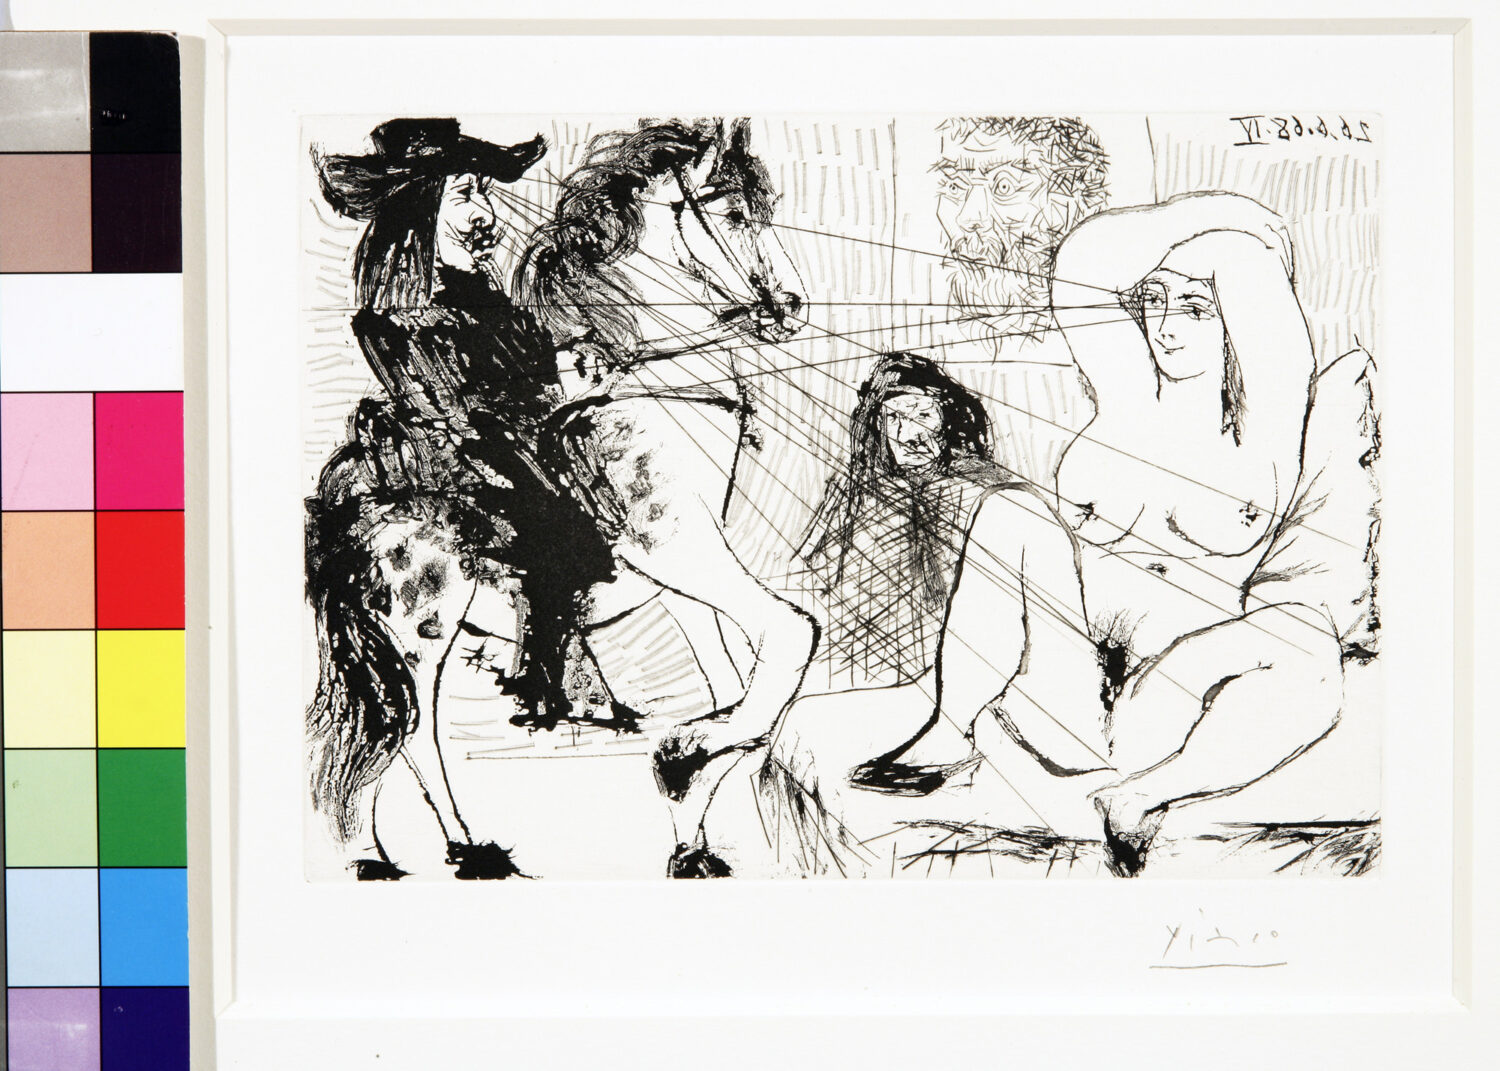 thumbnail of Aquatint, Drypoint and Scraper by Pablo Picasso untitled: 26 Juin 1968 IV.